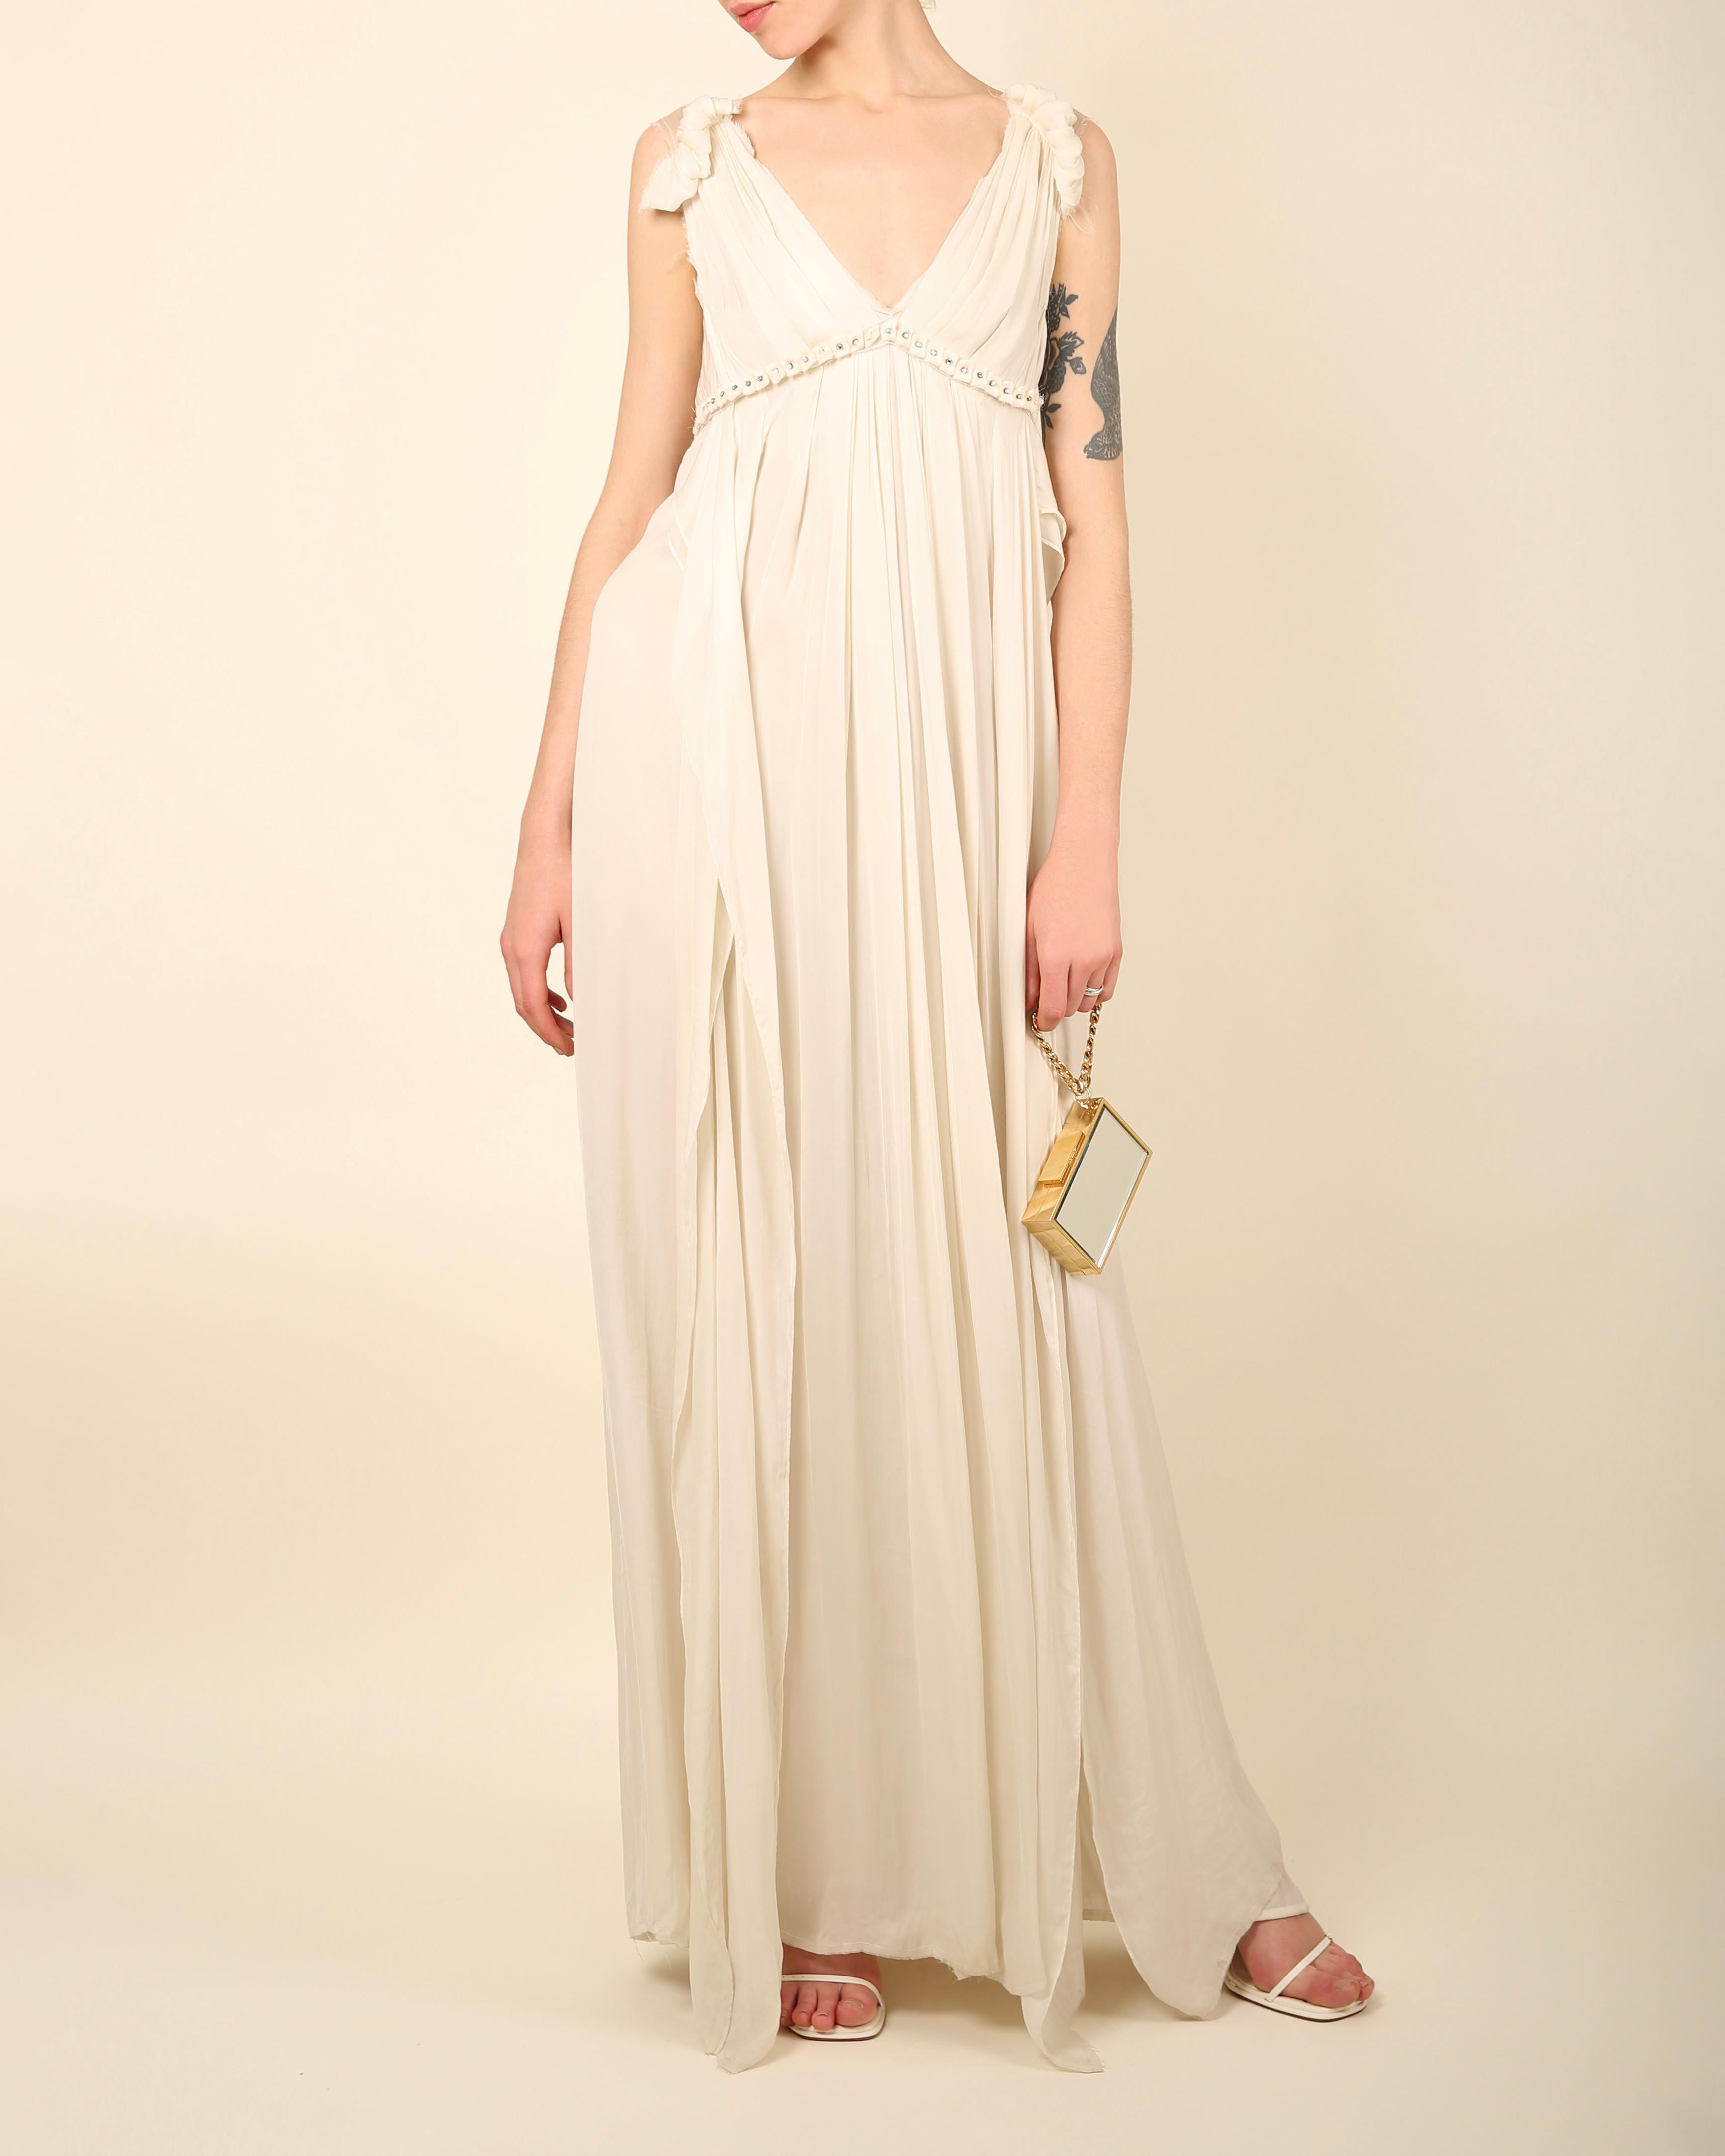 Lanvin white grecian style washed silk crystal embellished wedding dress gown In Fair Condition For Sale In Paris, FR